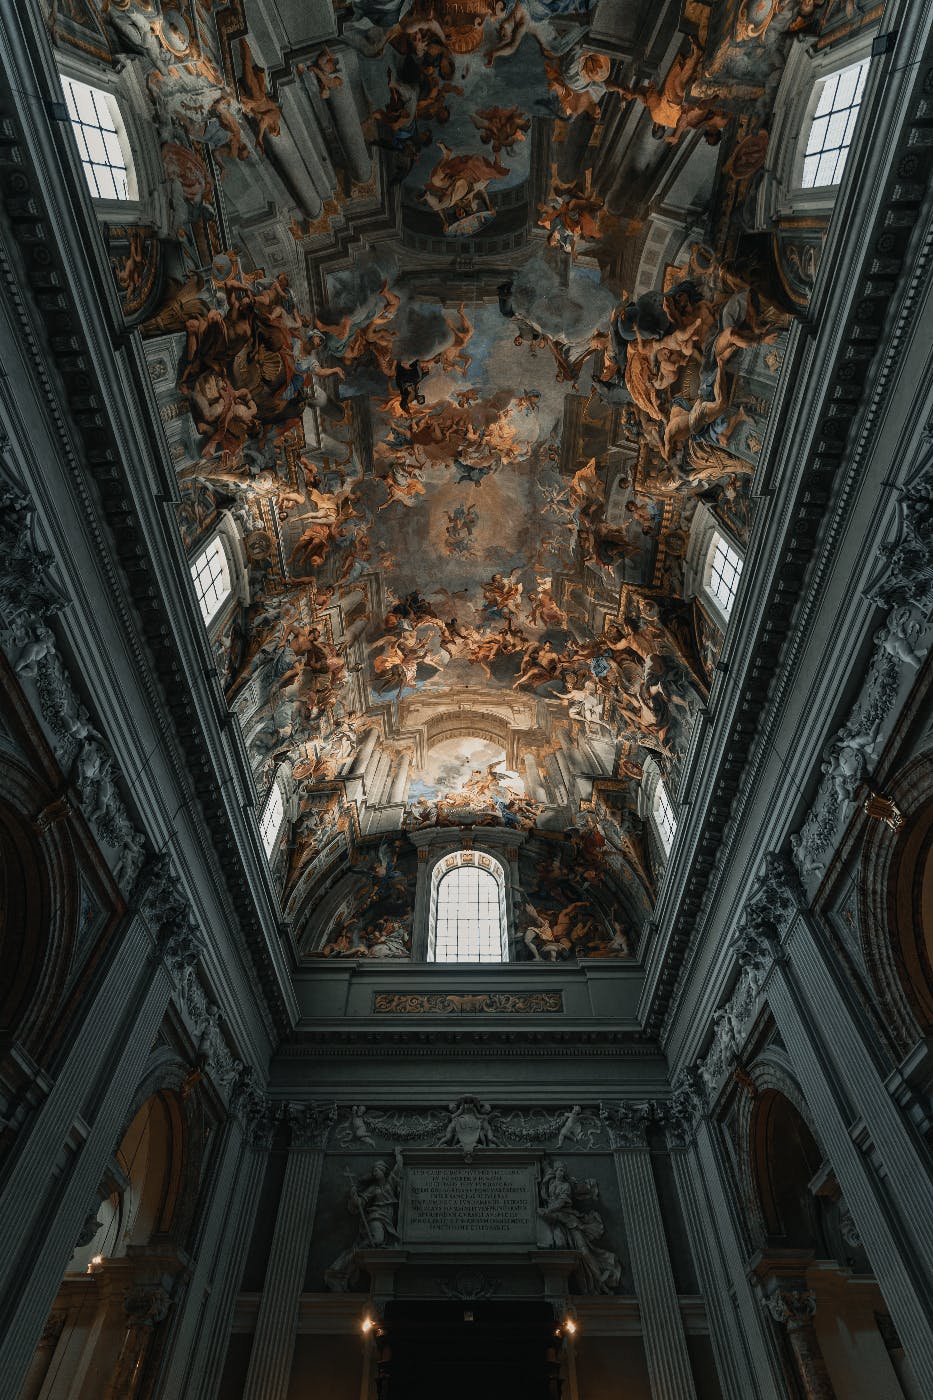 The ceiling of the sistine chapel